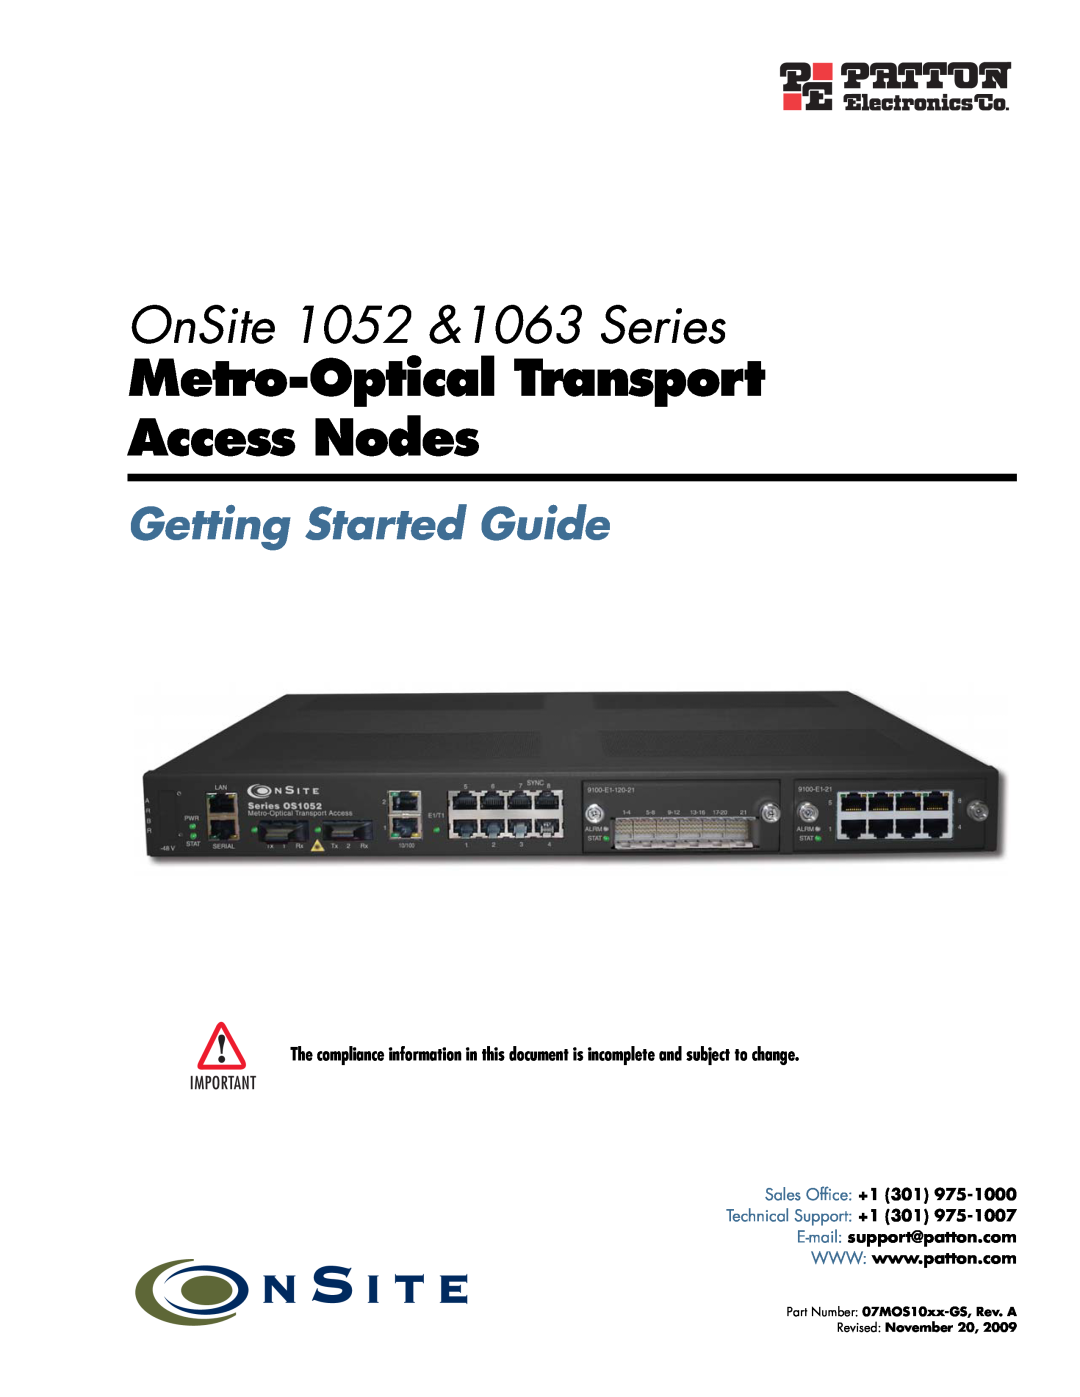 Patton electronic manual OnSite 1052 &1063 Series, Metro-Optical Transport Access Nodes, Getting Started Guide 